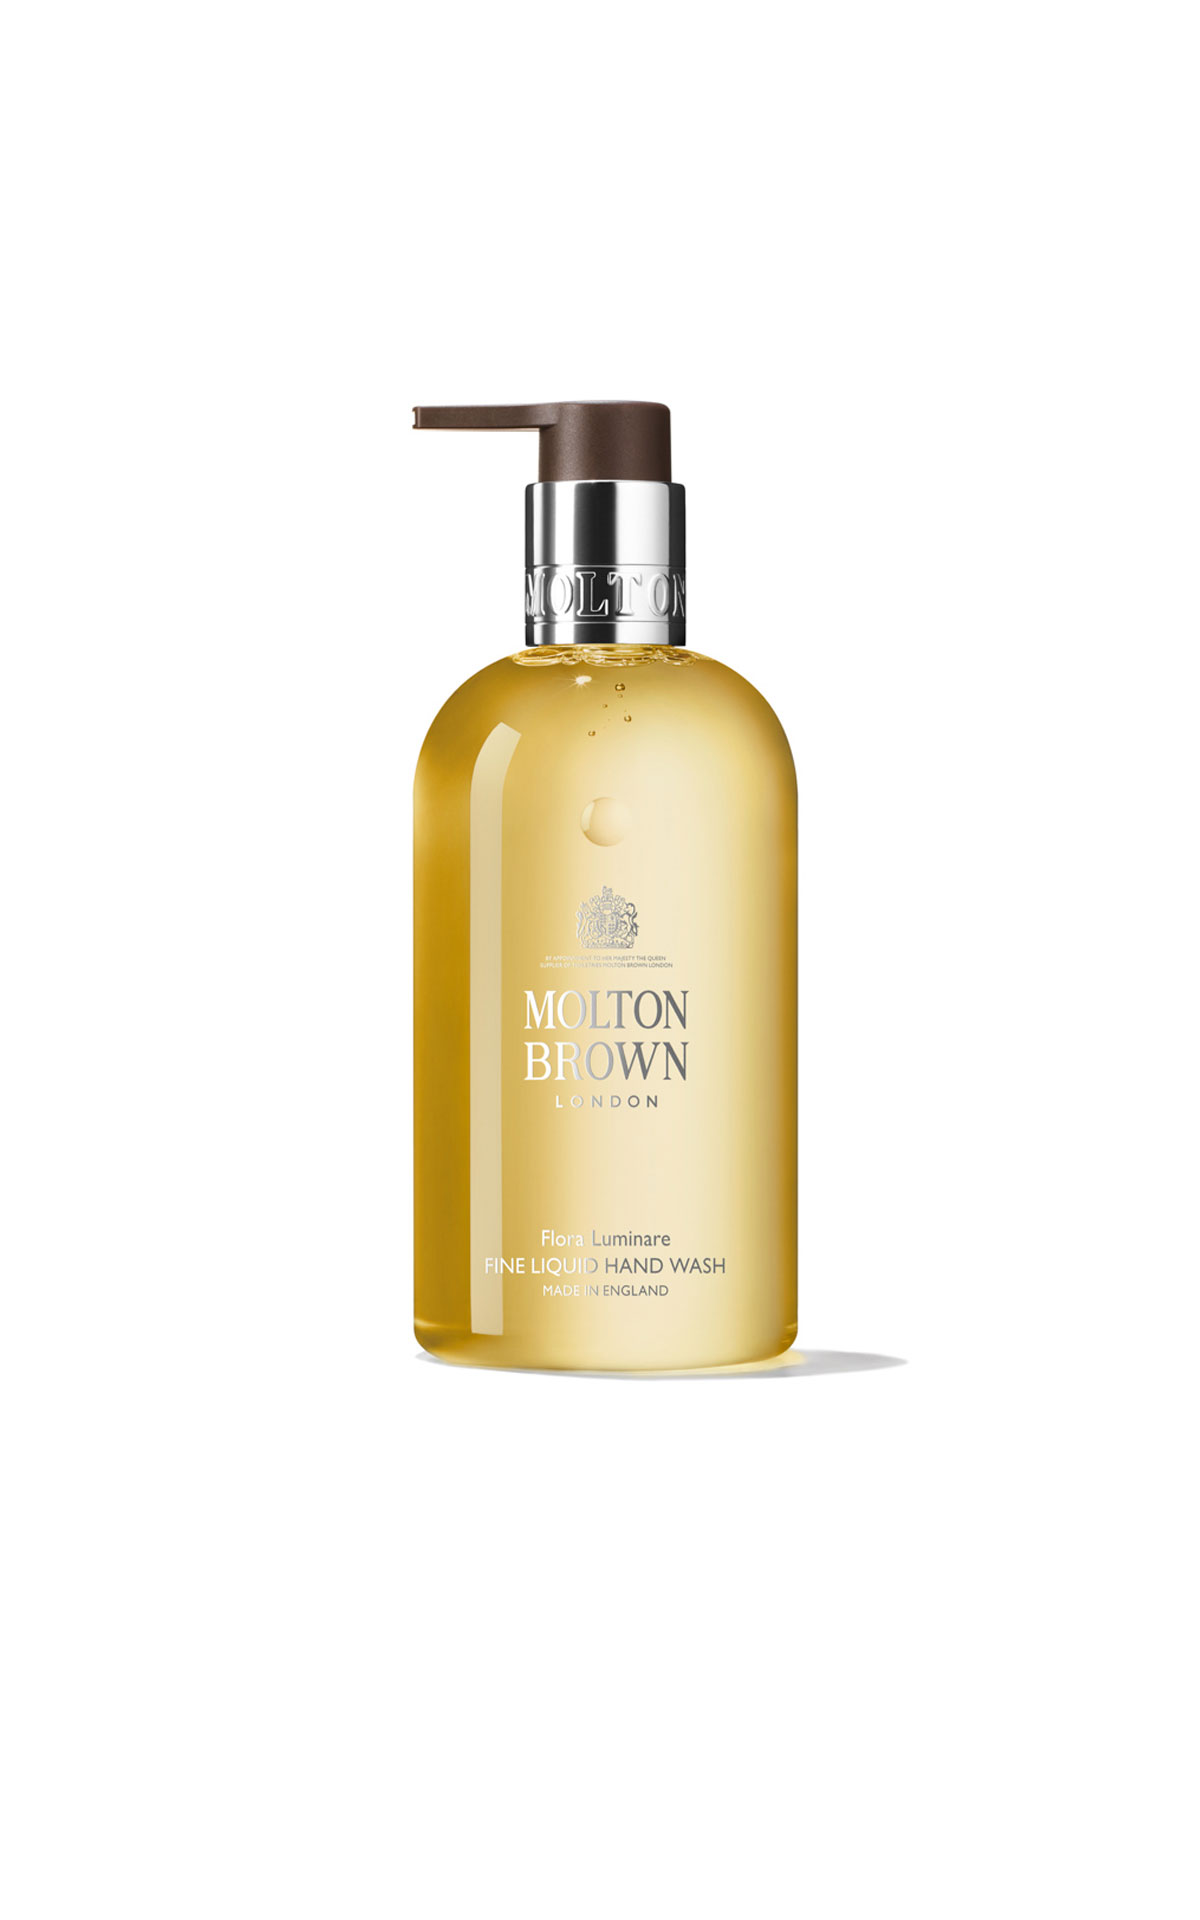 Molton Brown 300ml hand wash floral luminare from Bicester Village